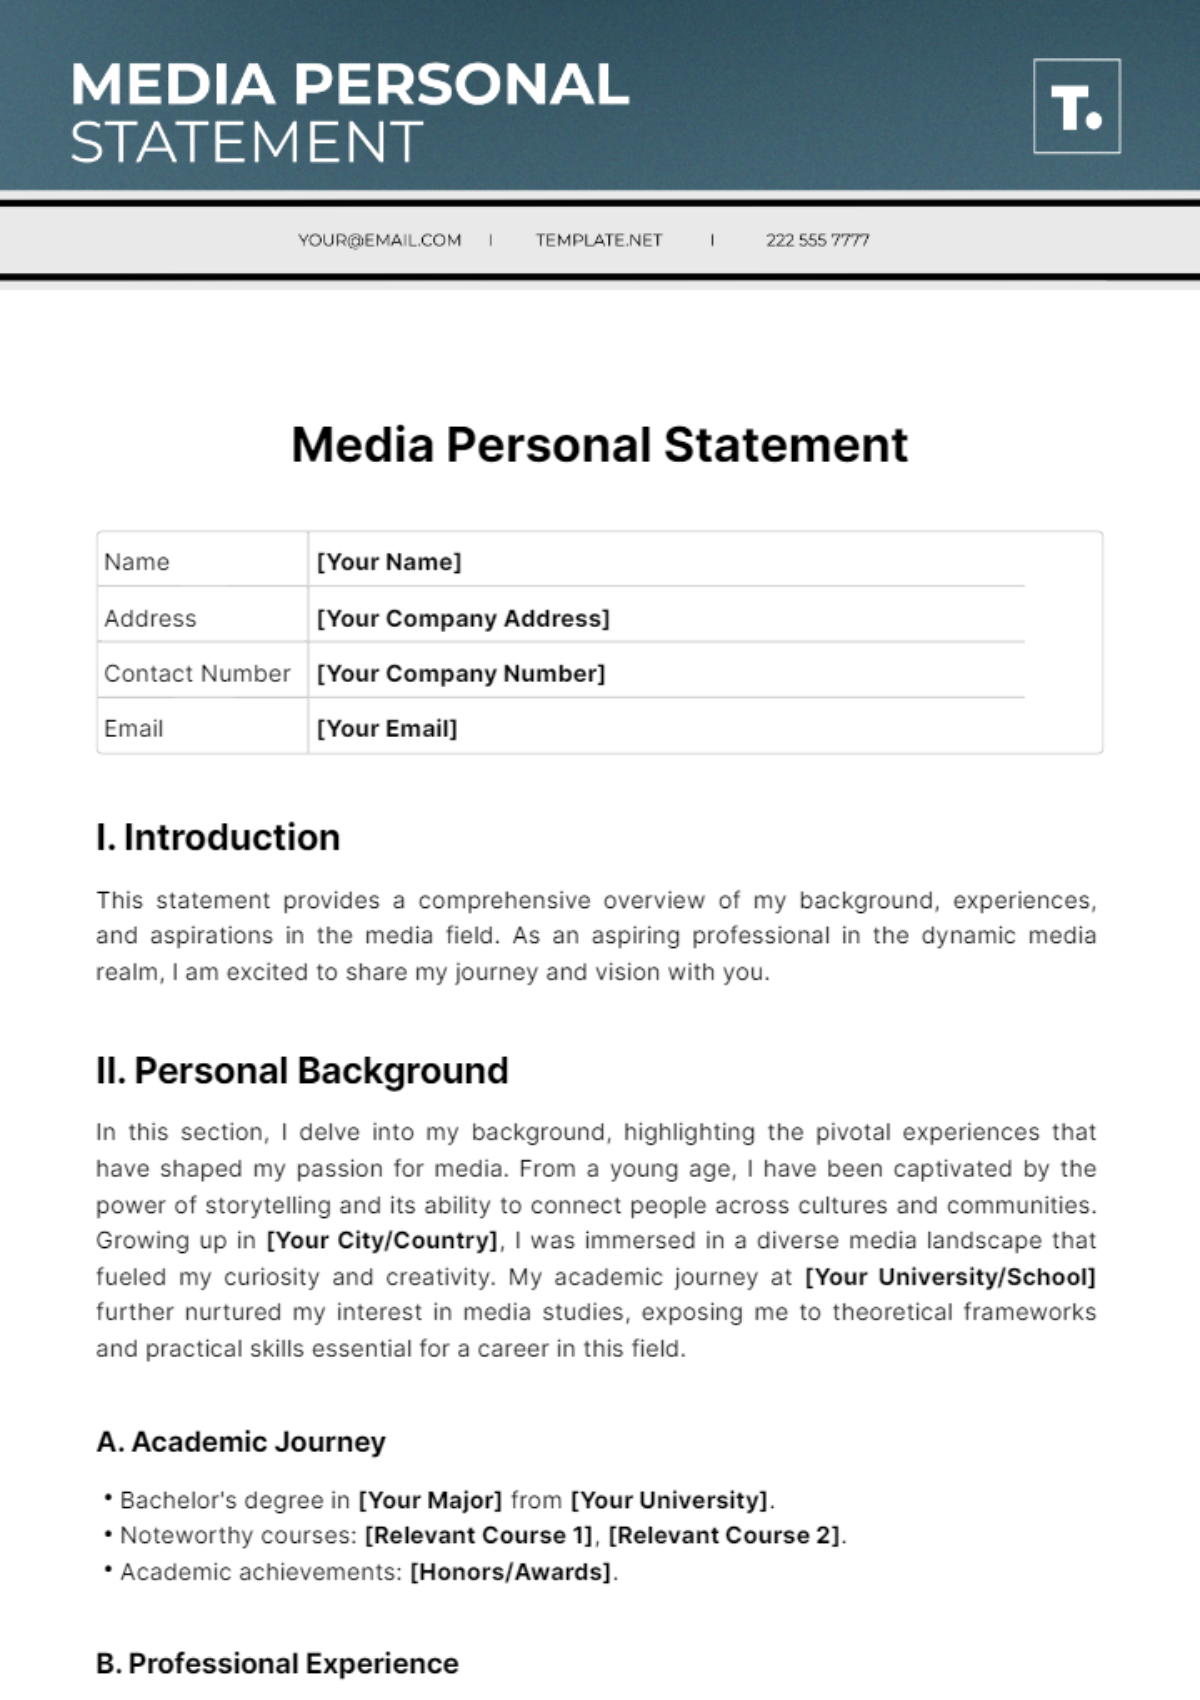 Media Personal Statement Template